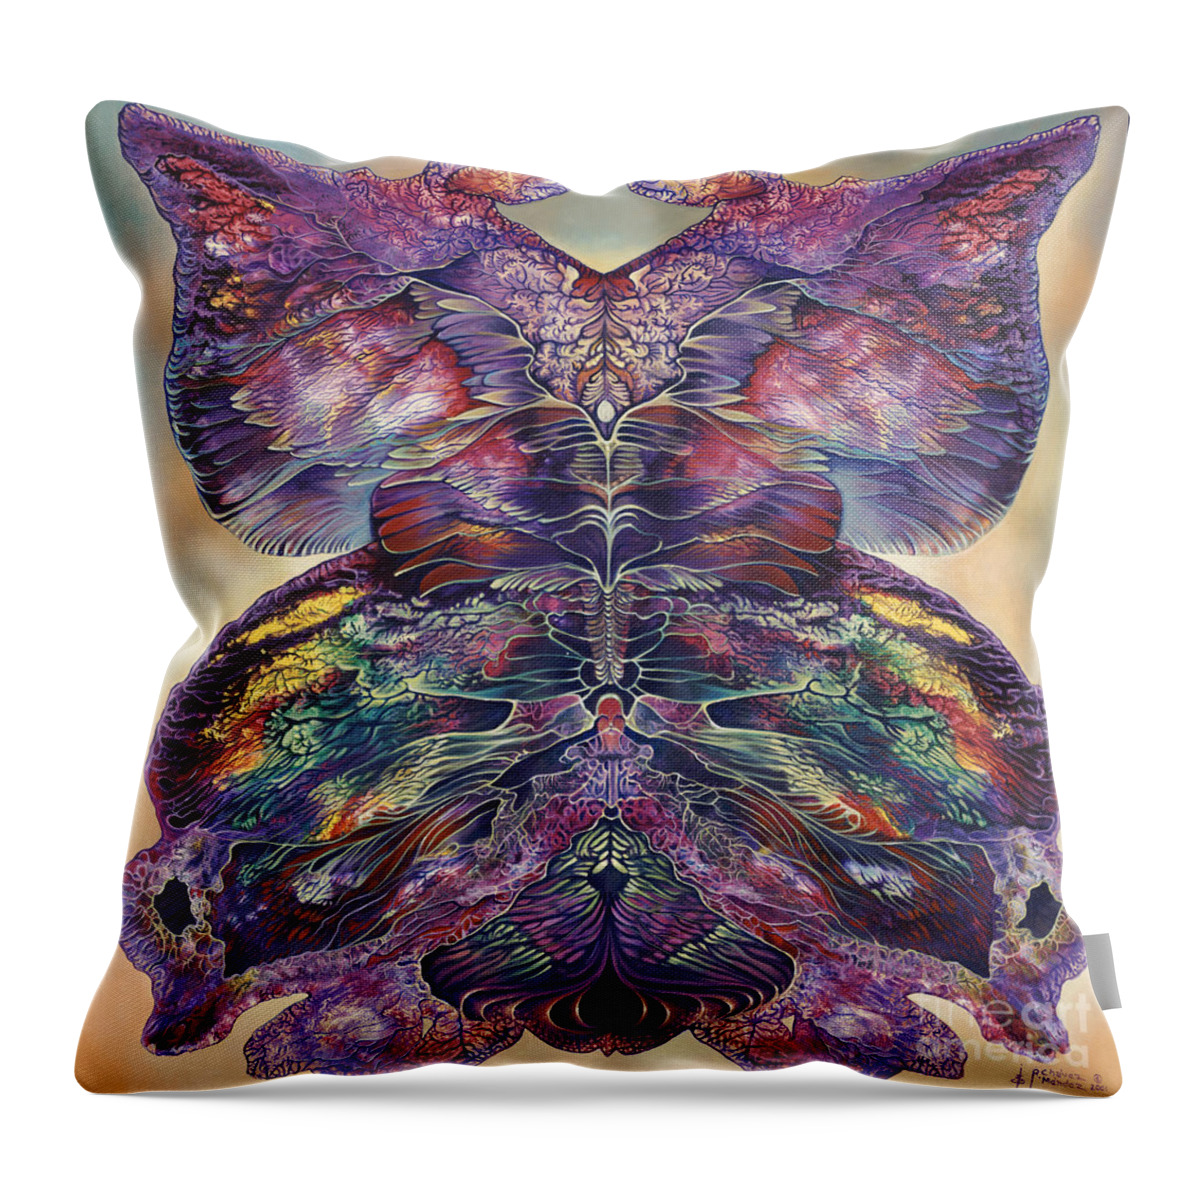 Butterfly Throw Pillow featuring the painting Papalotl Series 3 by Ricardo Chavez-Mendez